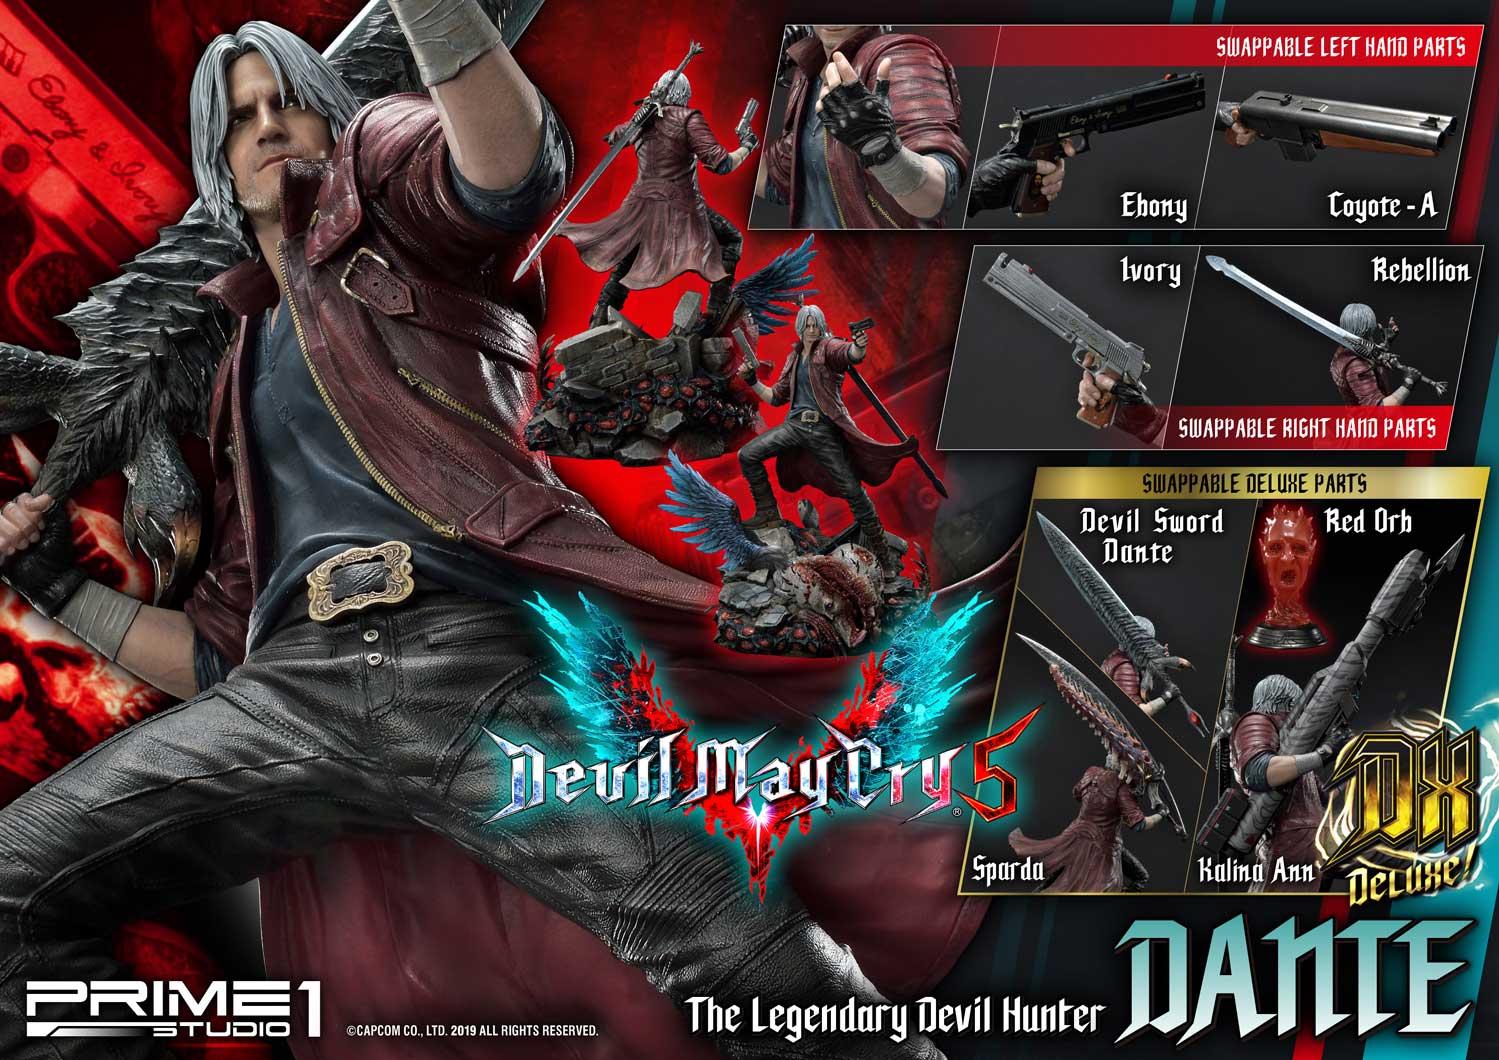 1/3 Scale Statue: Dante Masters Edition Devil May Cry 1/3 Scale Ultimate  Statue by Darkside Collectibles Studio